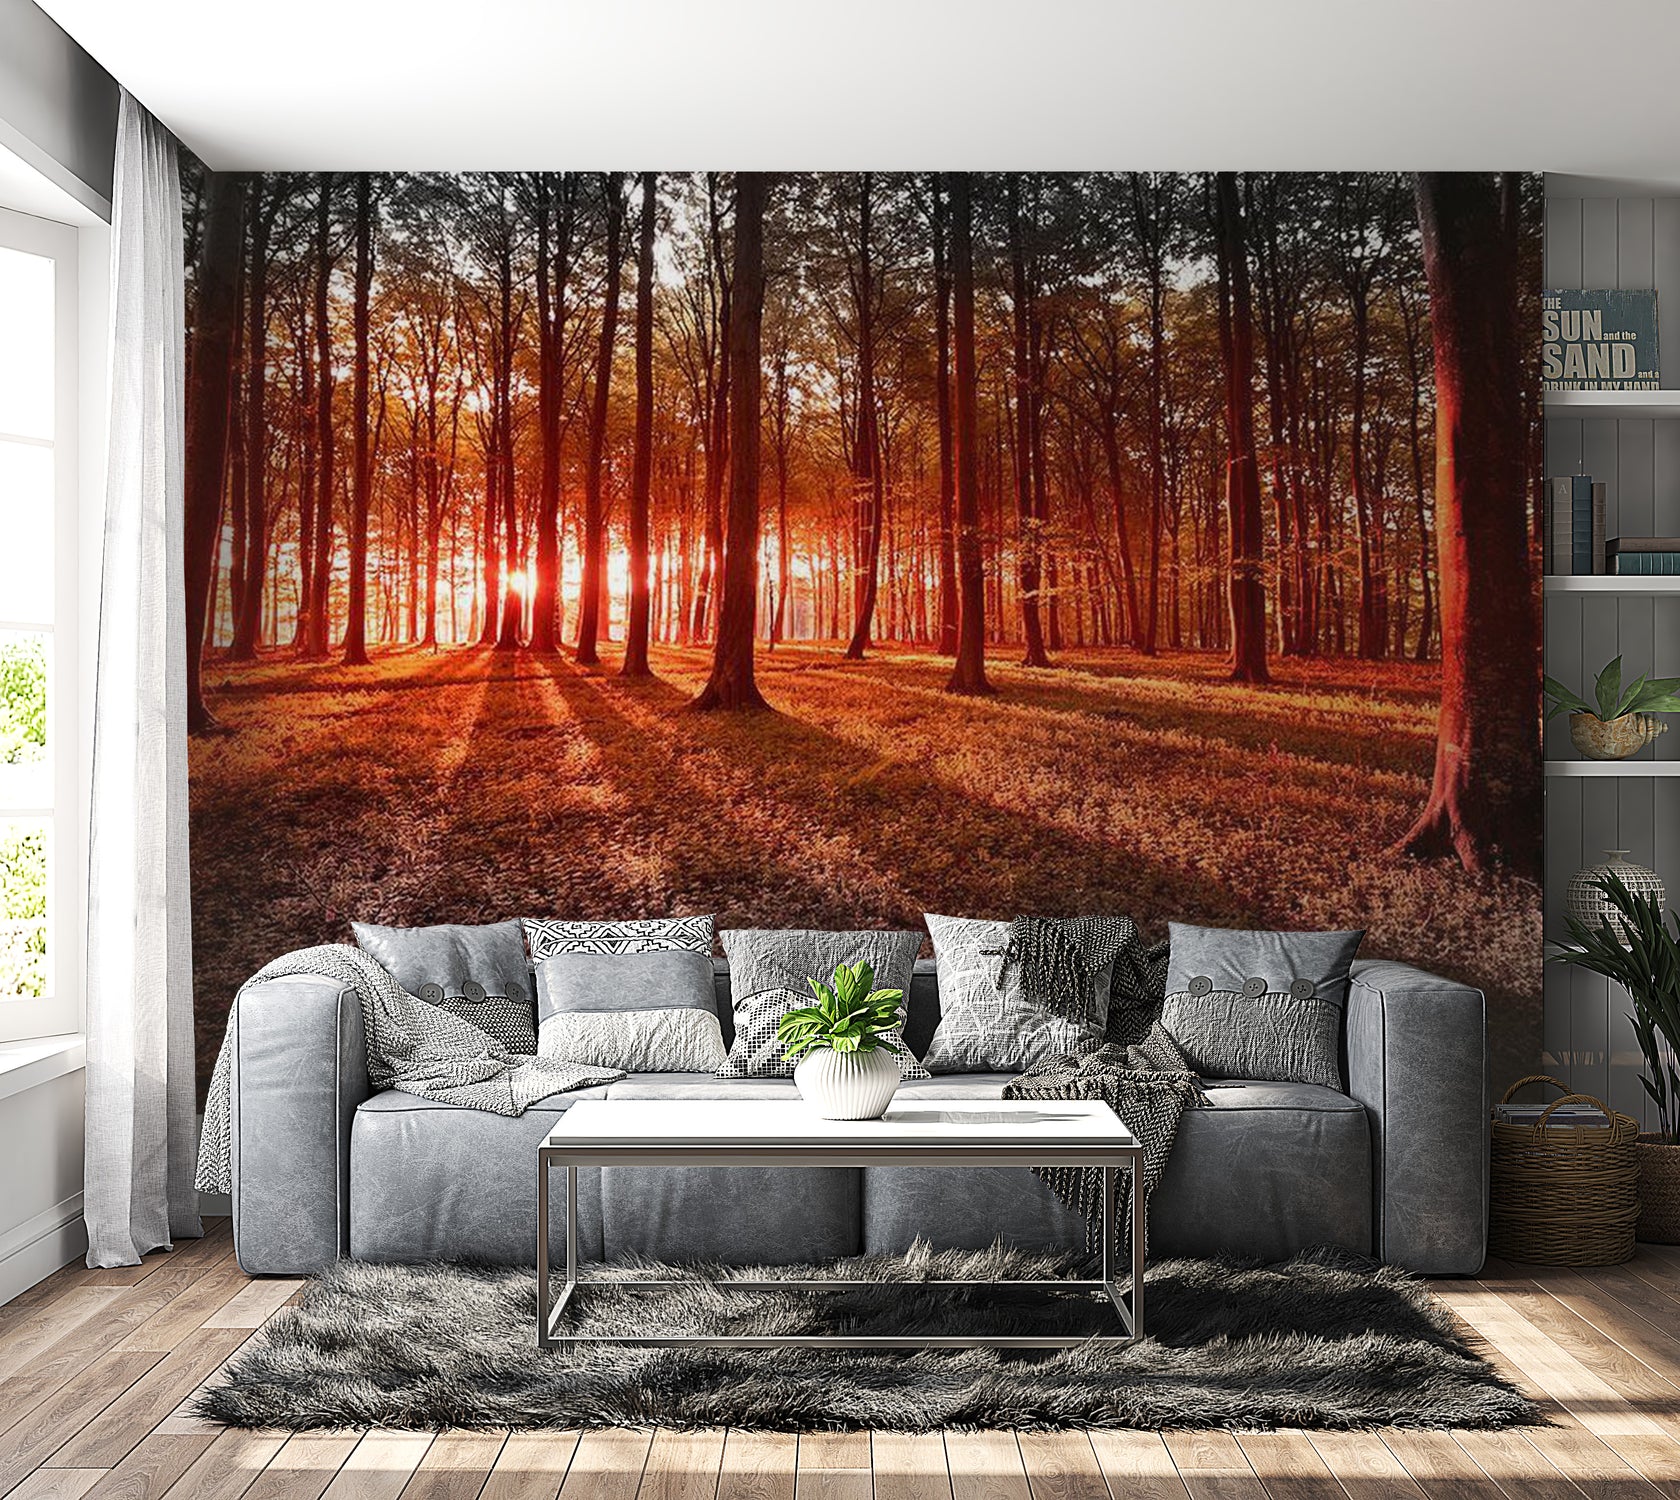 Peel & Stick Forest Wall Mural - Autumn Morning Nature - Removable Wall Decals